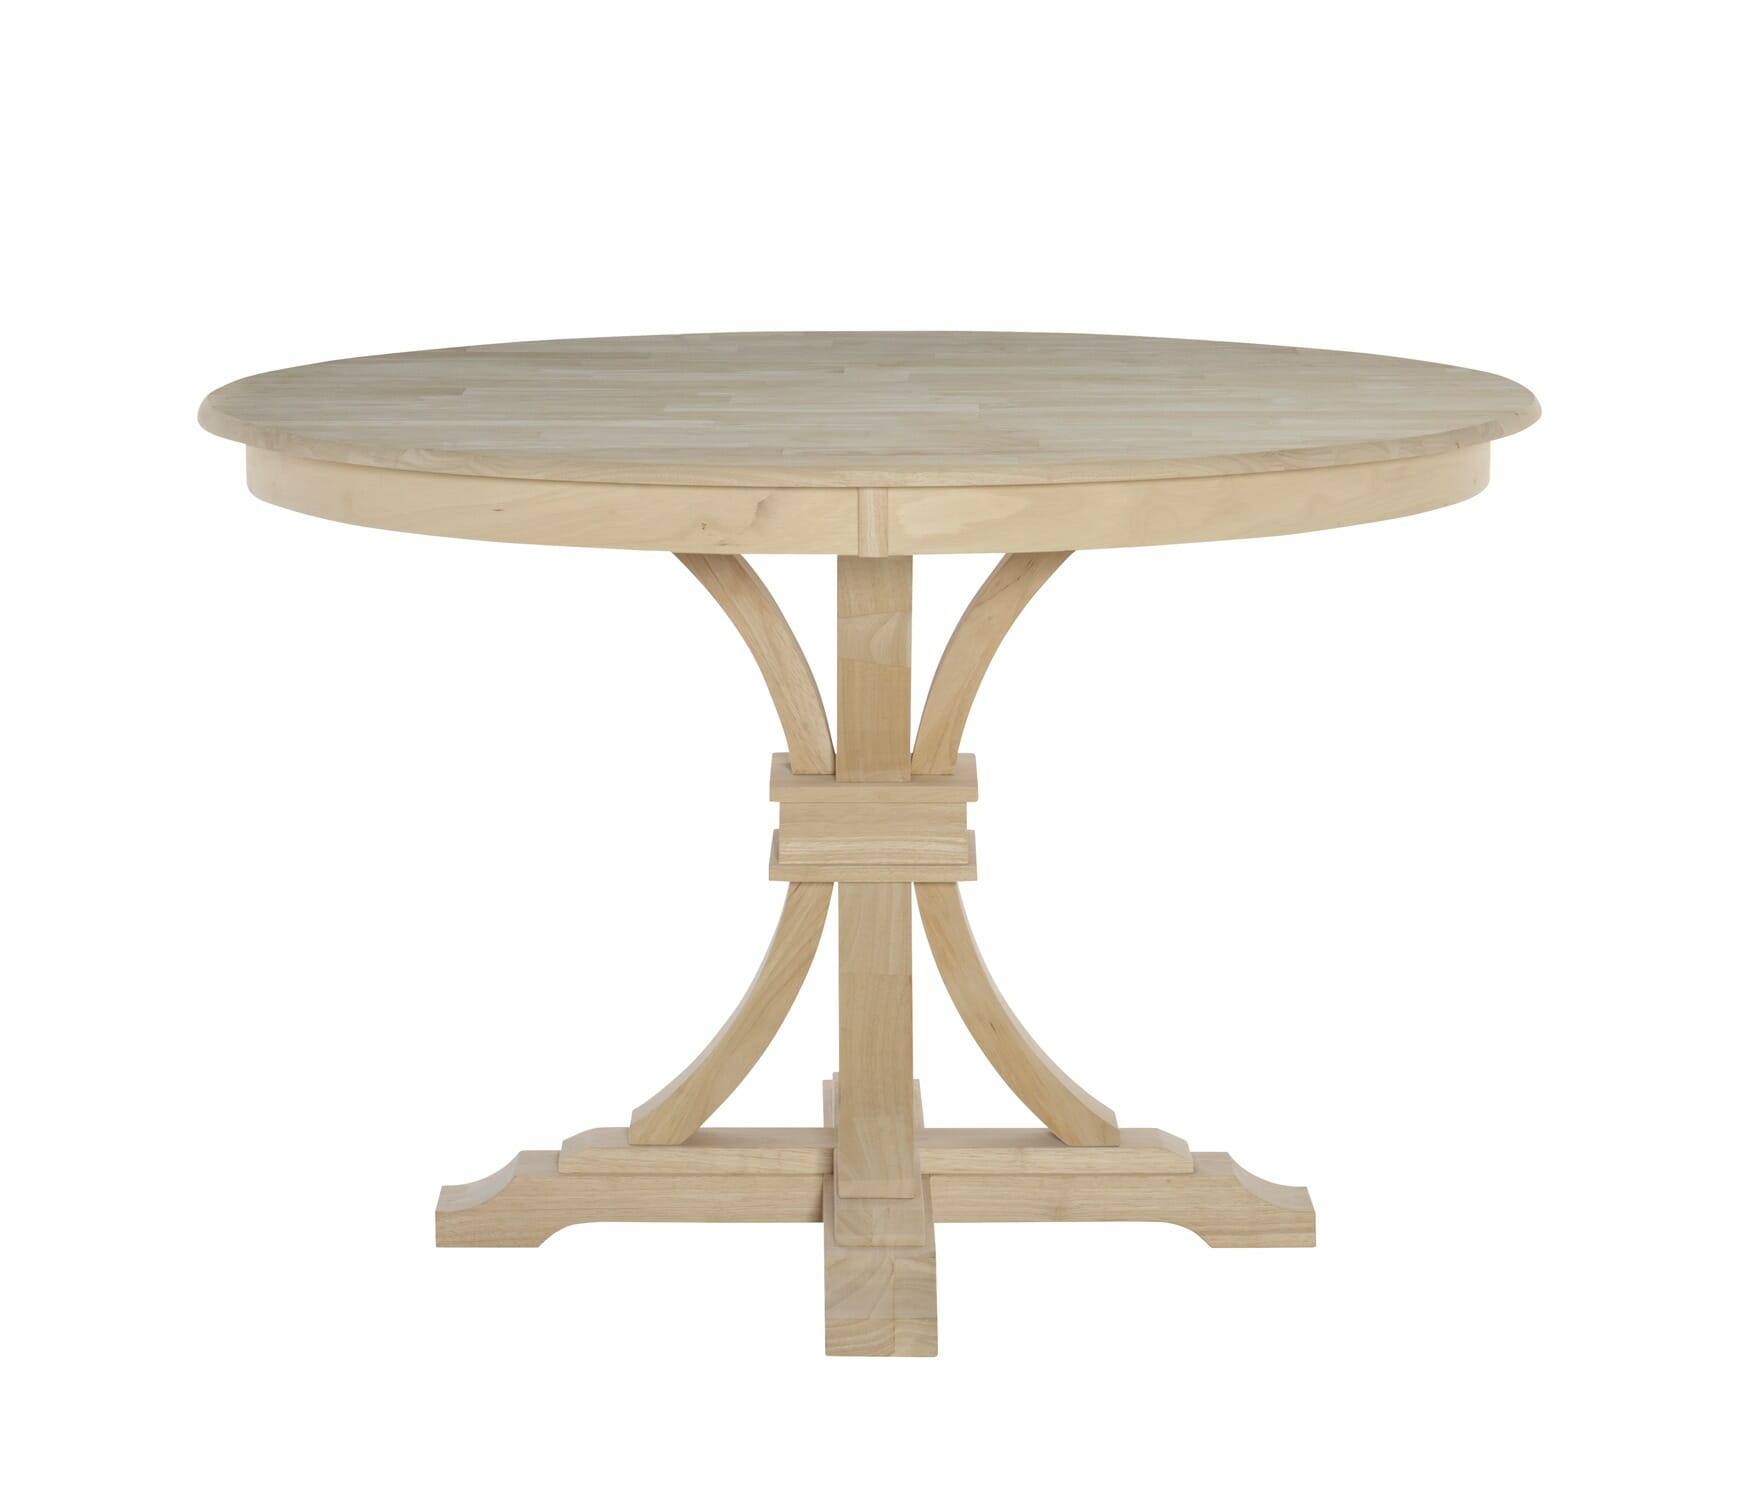 T 48rt 48 Solid Round Create A Table, 48 Round Table With Leaf